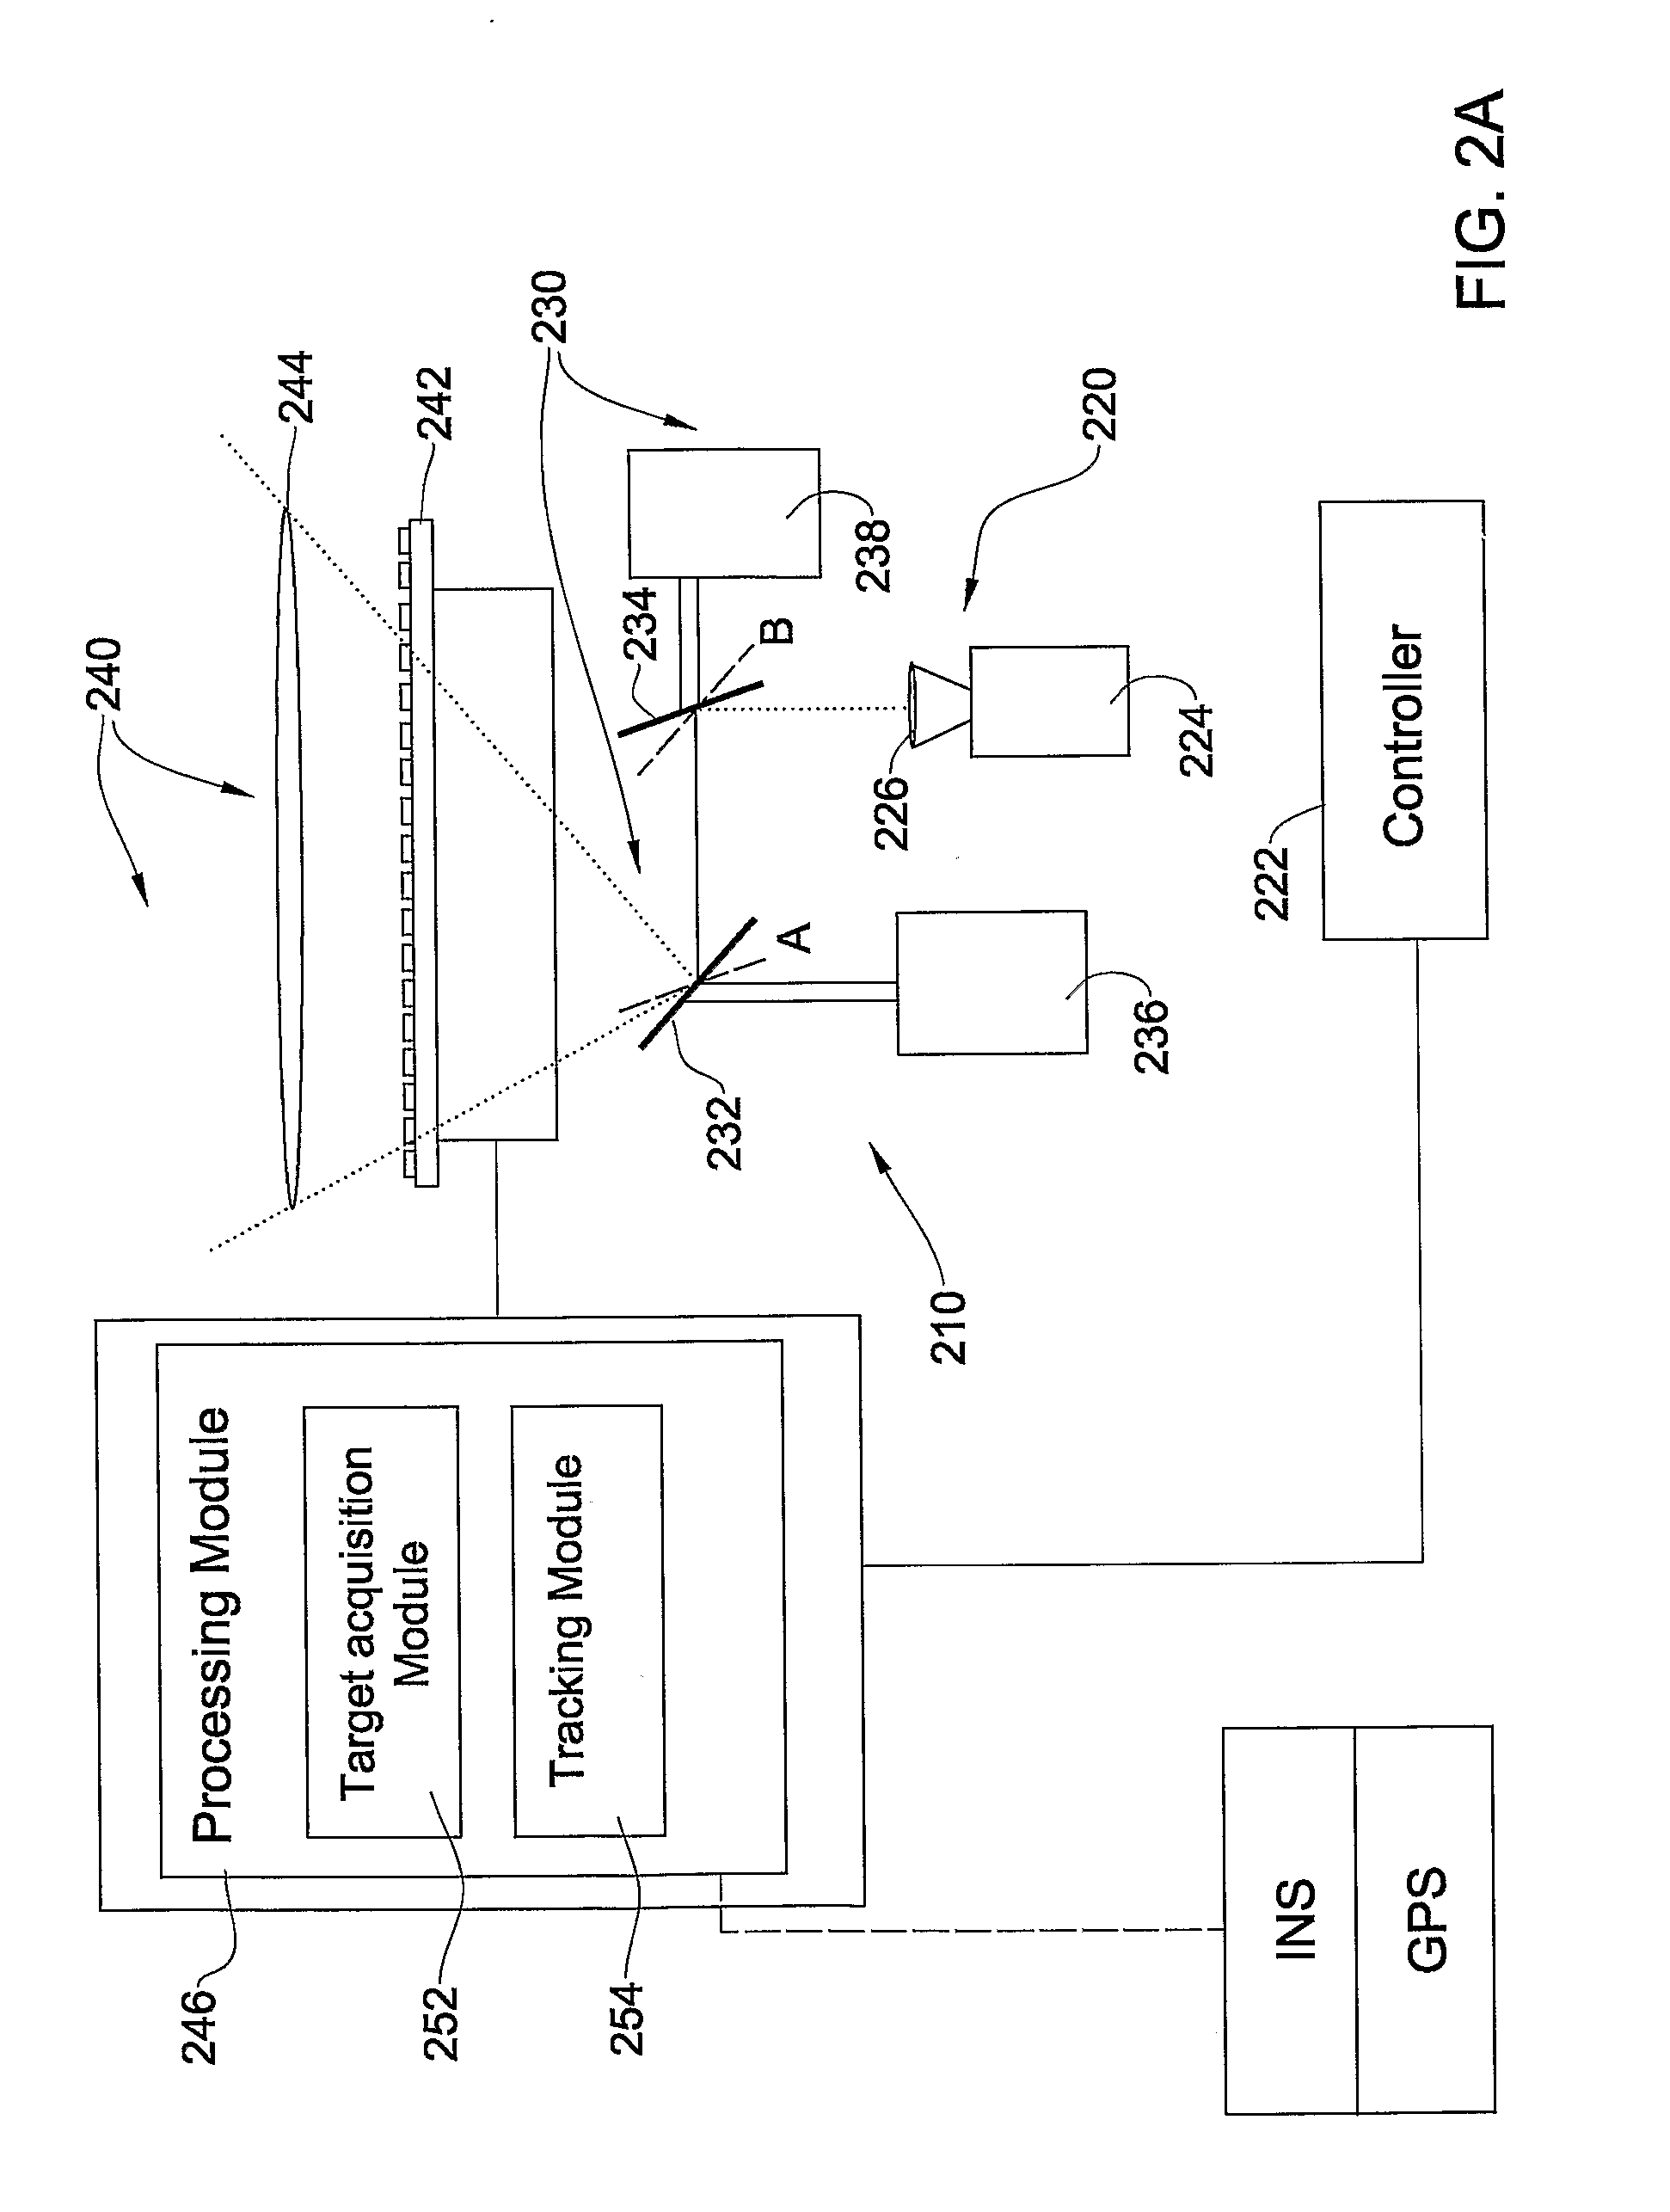 Distributed jammer system